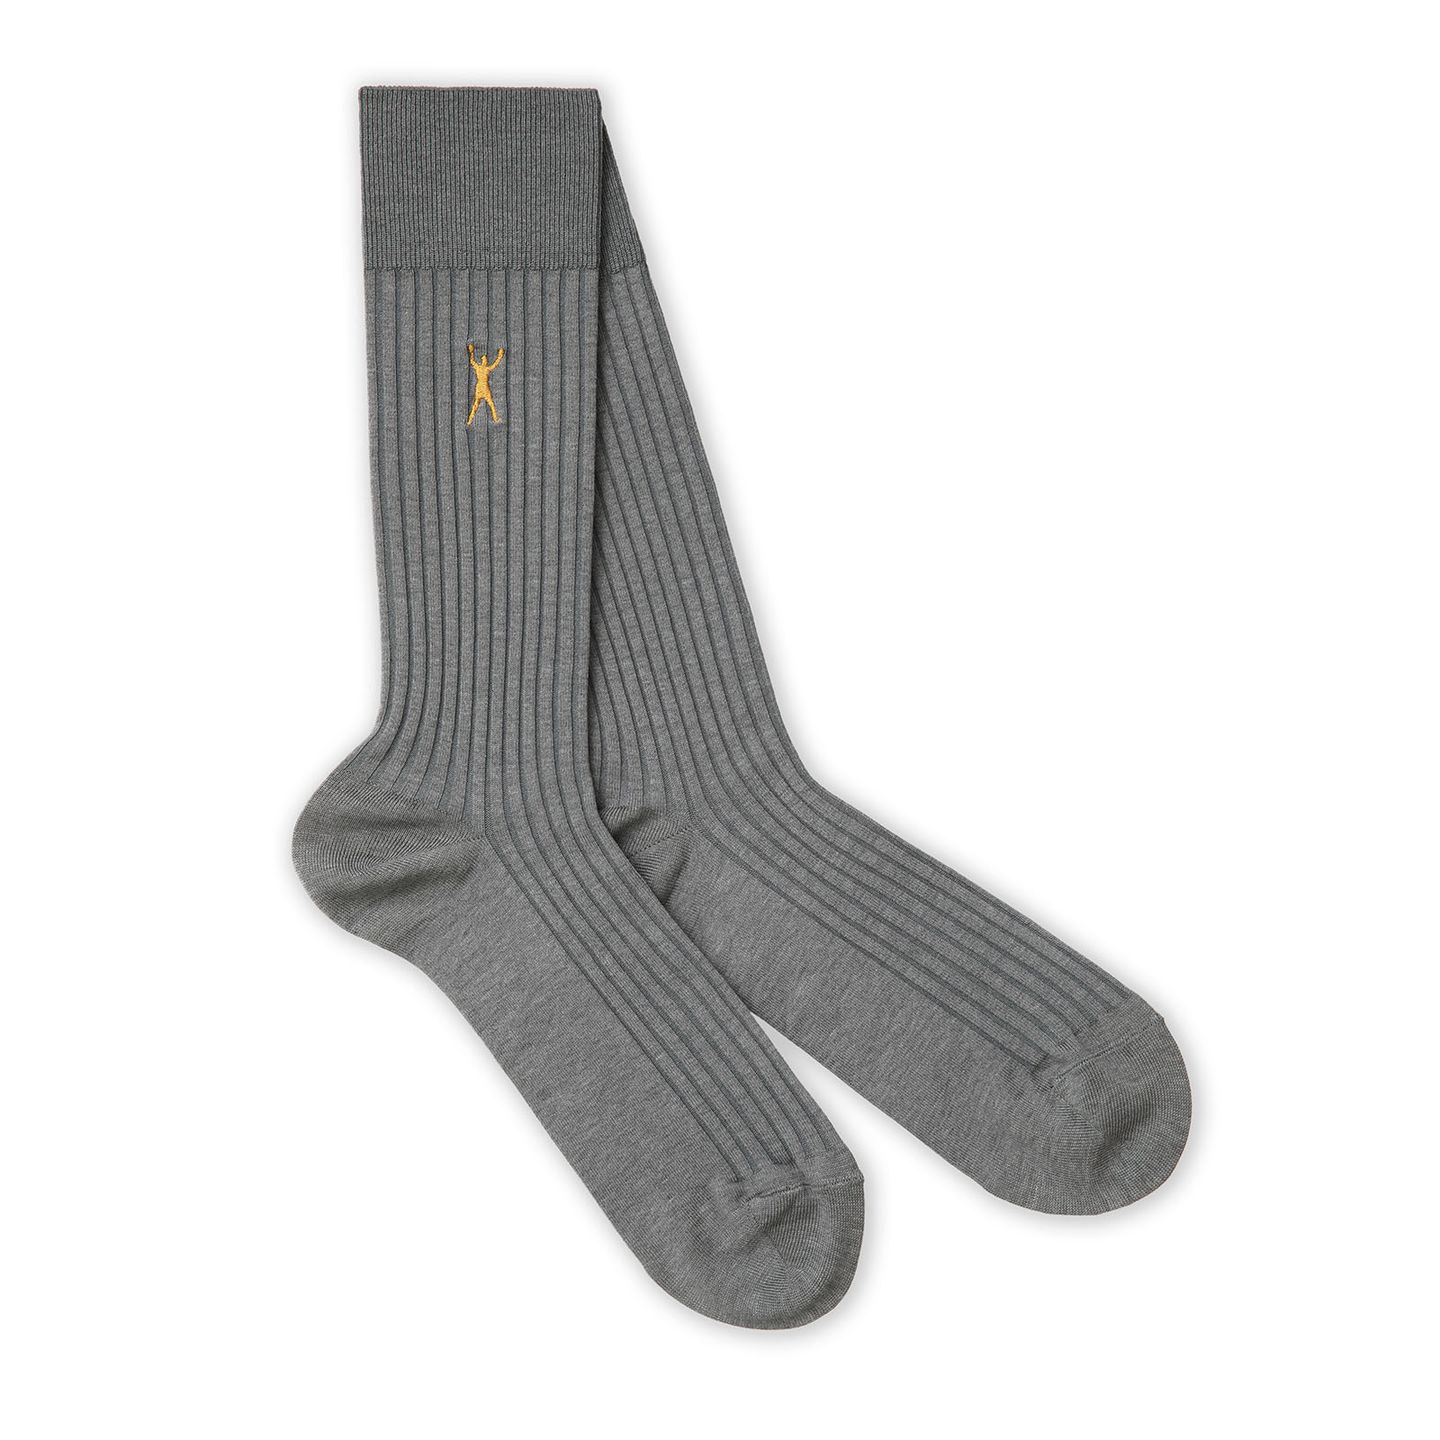 2 pair of grey socks with a white background